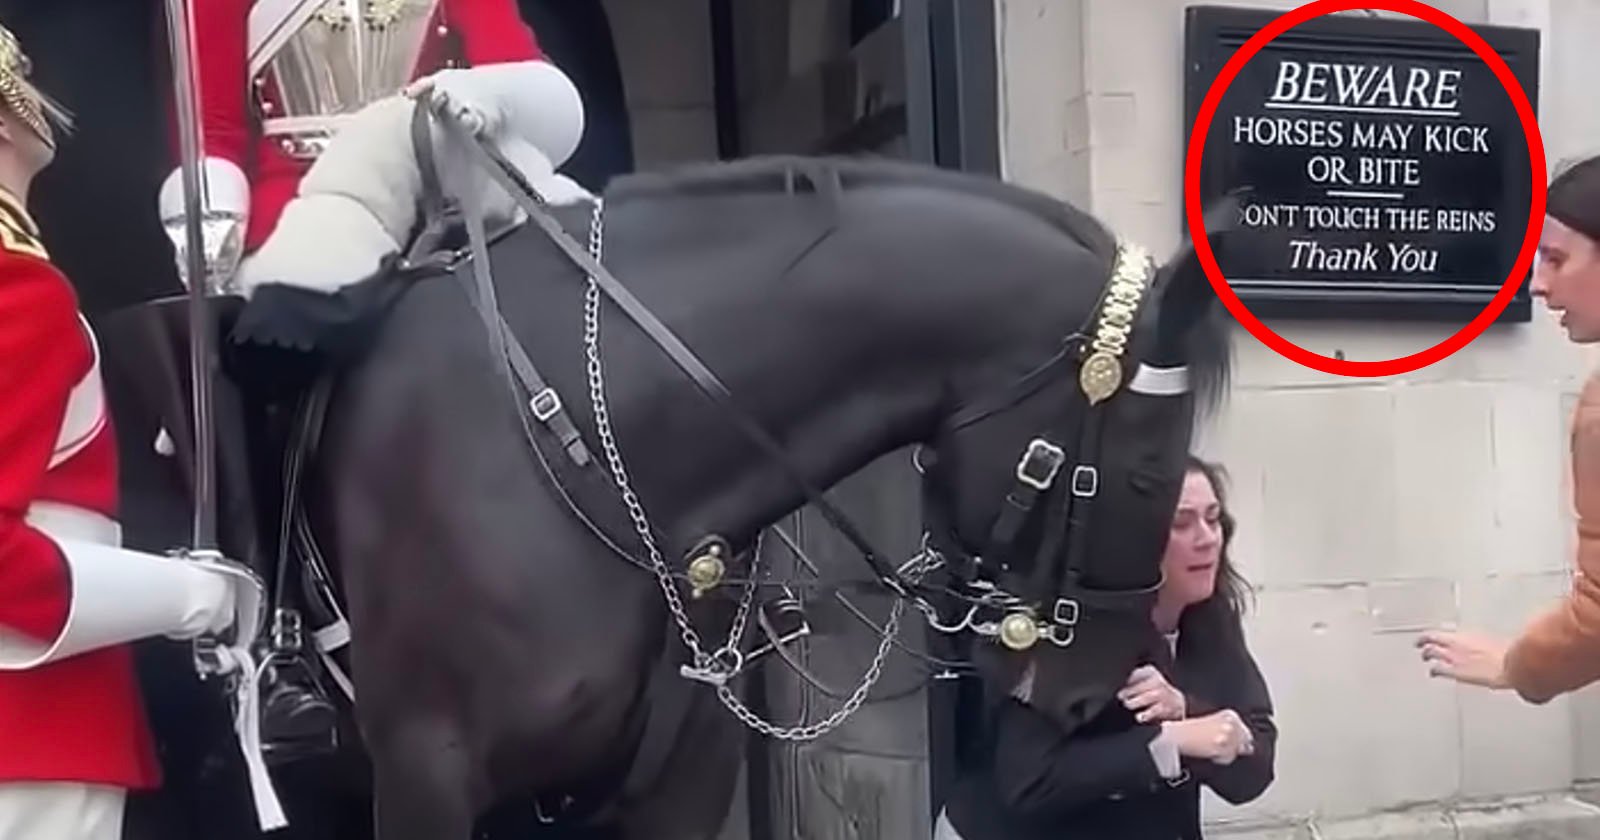 Woman is Bitten by Kings Guard Horse in London While Posing for Photo